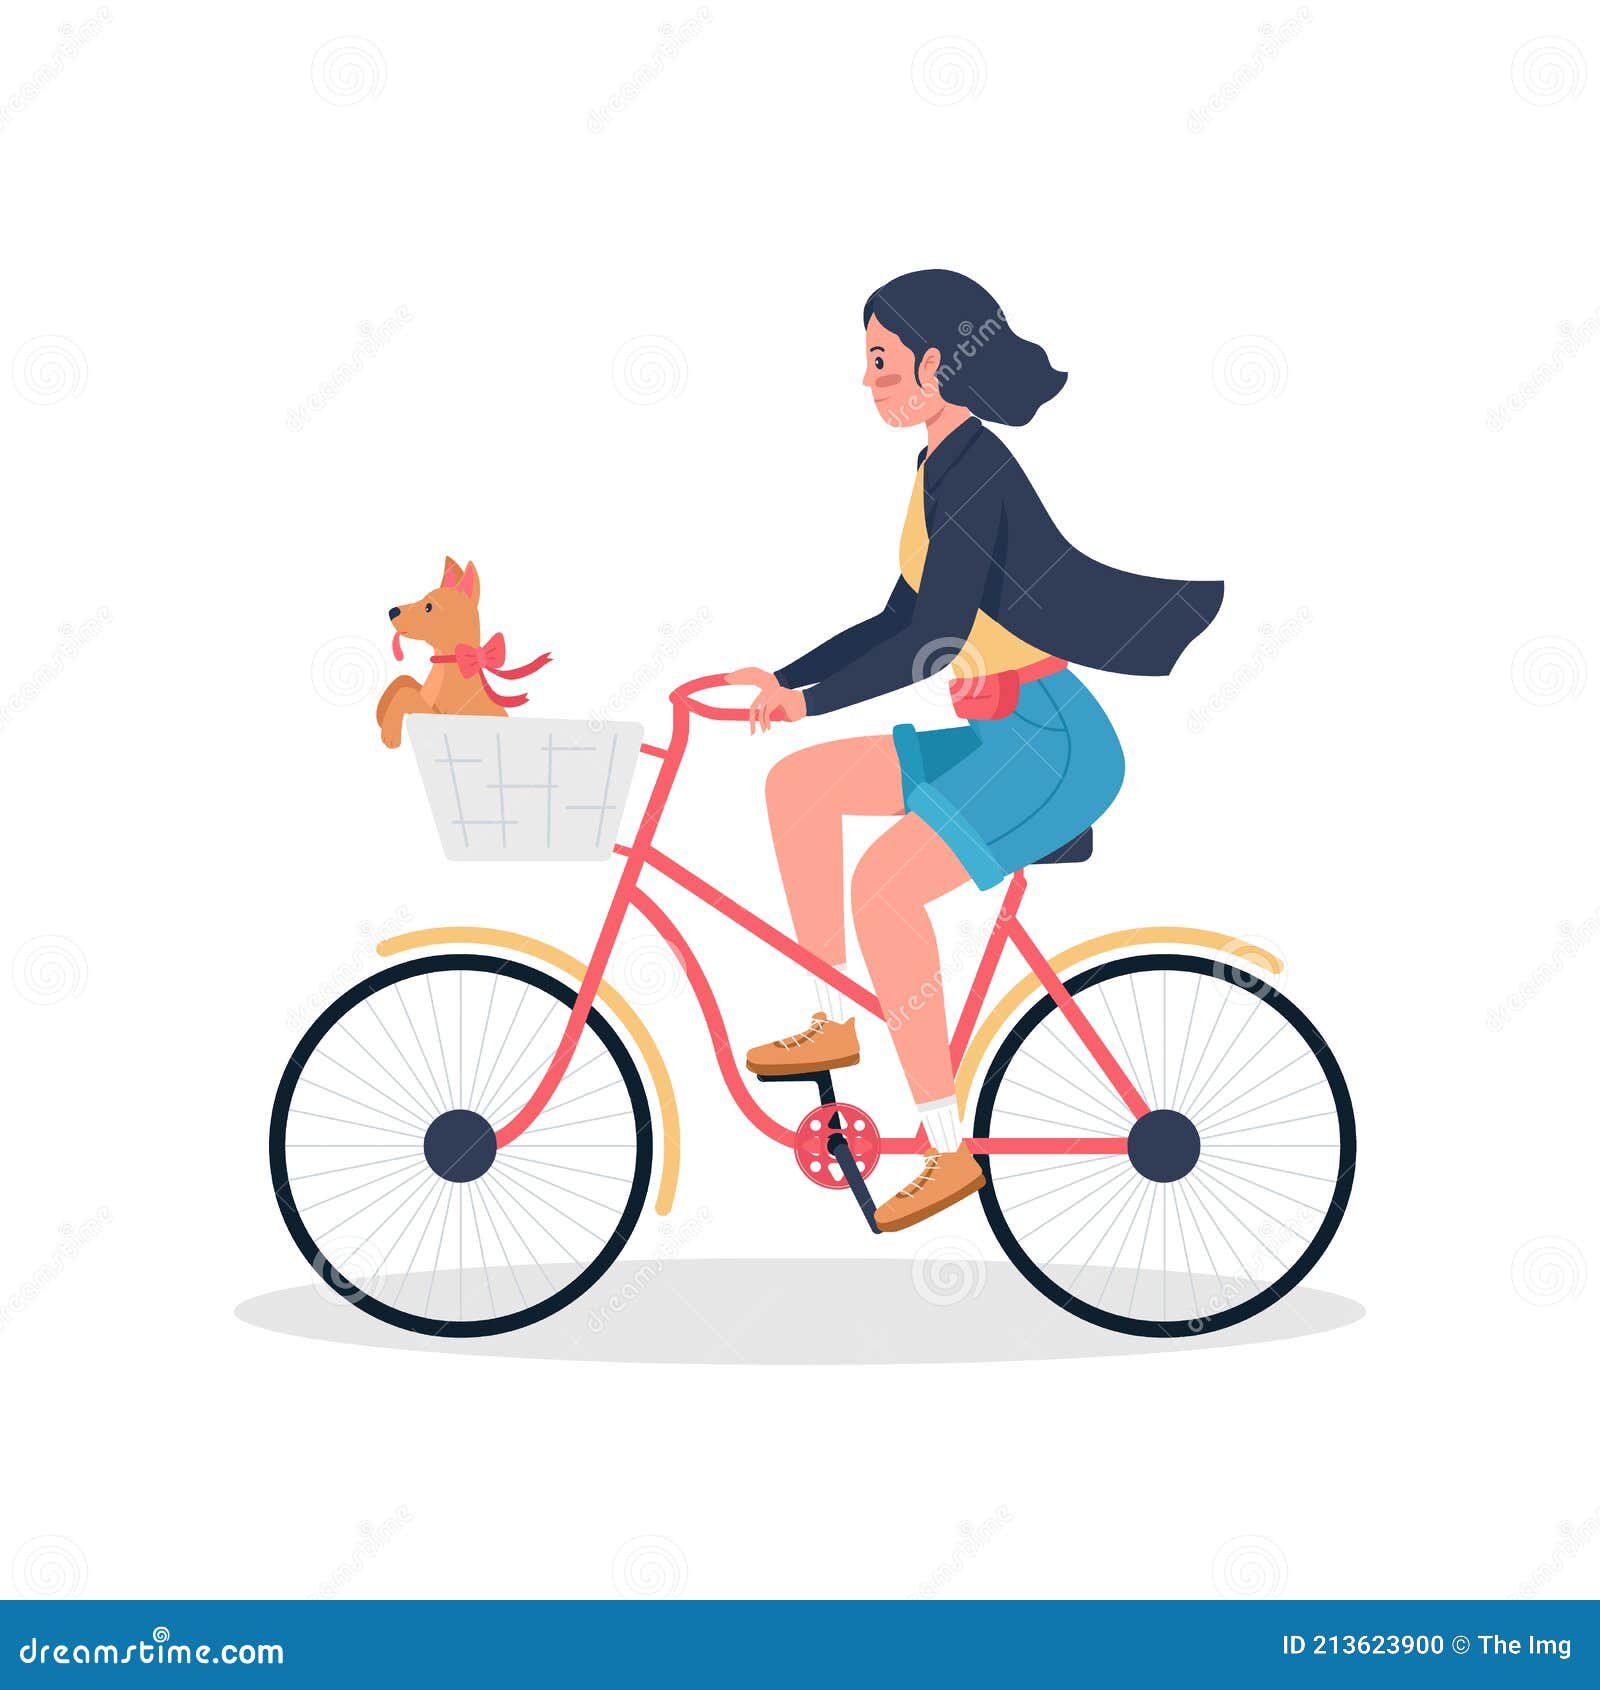 Woman Riding on Bicycle with Puppy in Basket Flat Color Vector Detailed Character Stock Vector - Illustration of graphic: 213623900